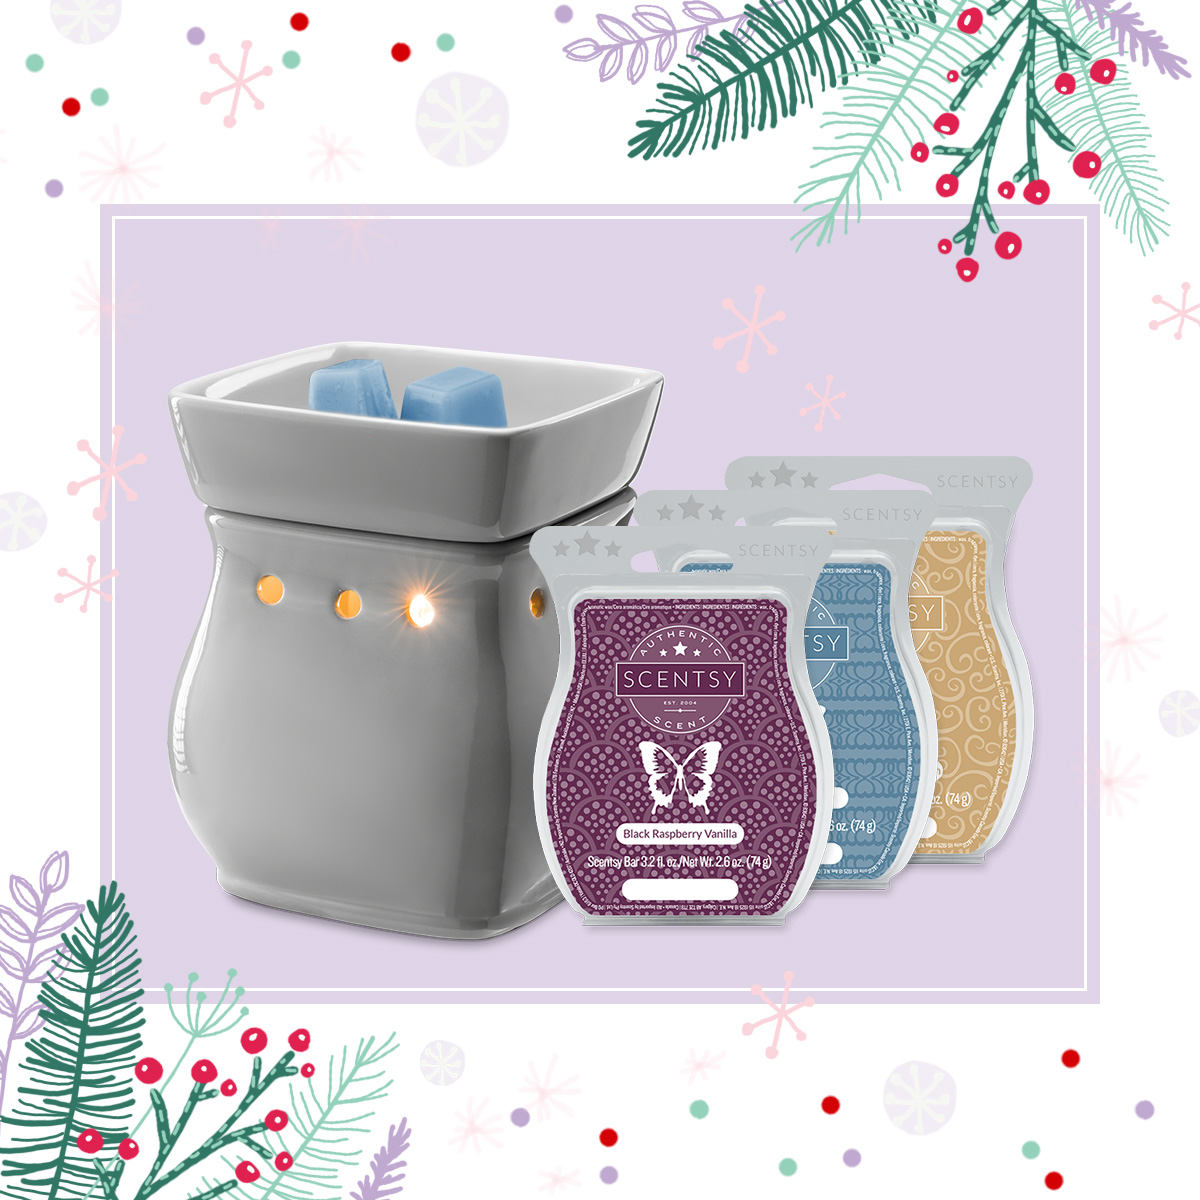 Classic Curve Gloss Gray Warmer Scentsy Gift Bundle.